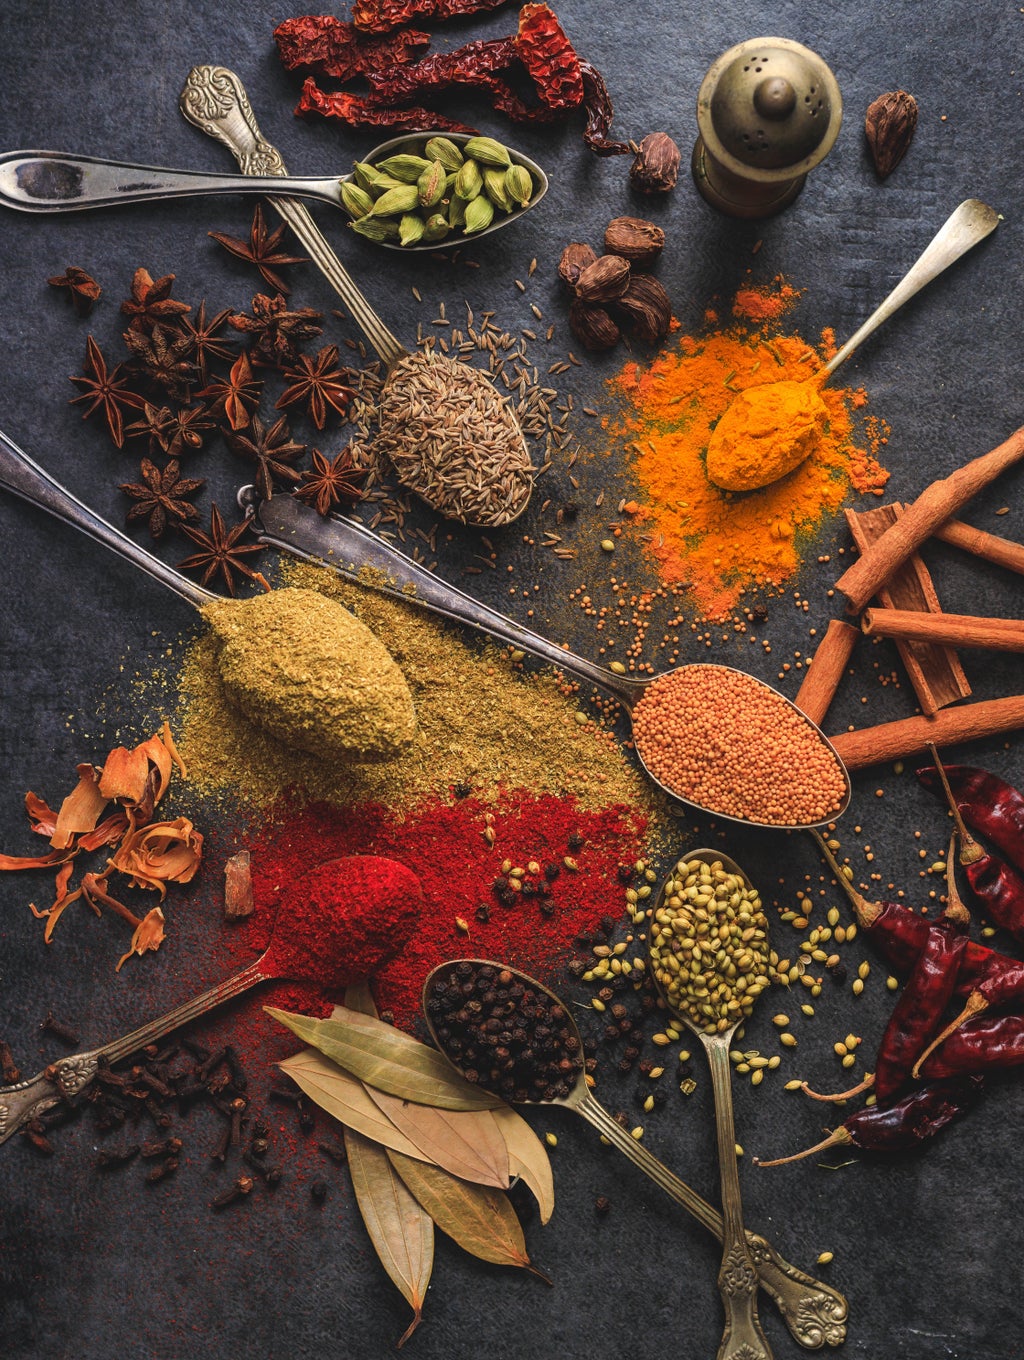 Spices are spilled out on a table